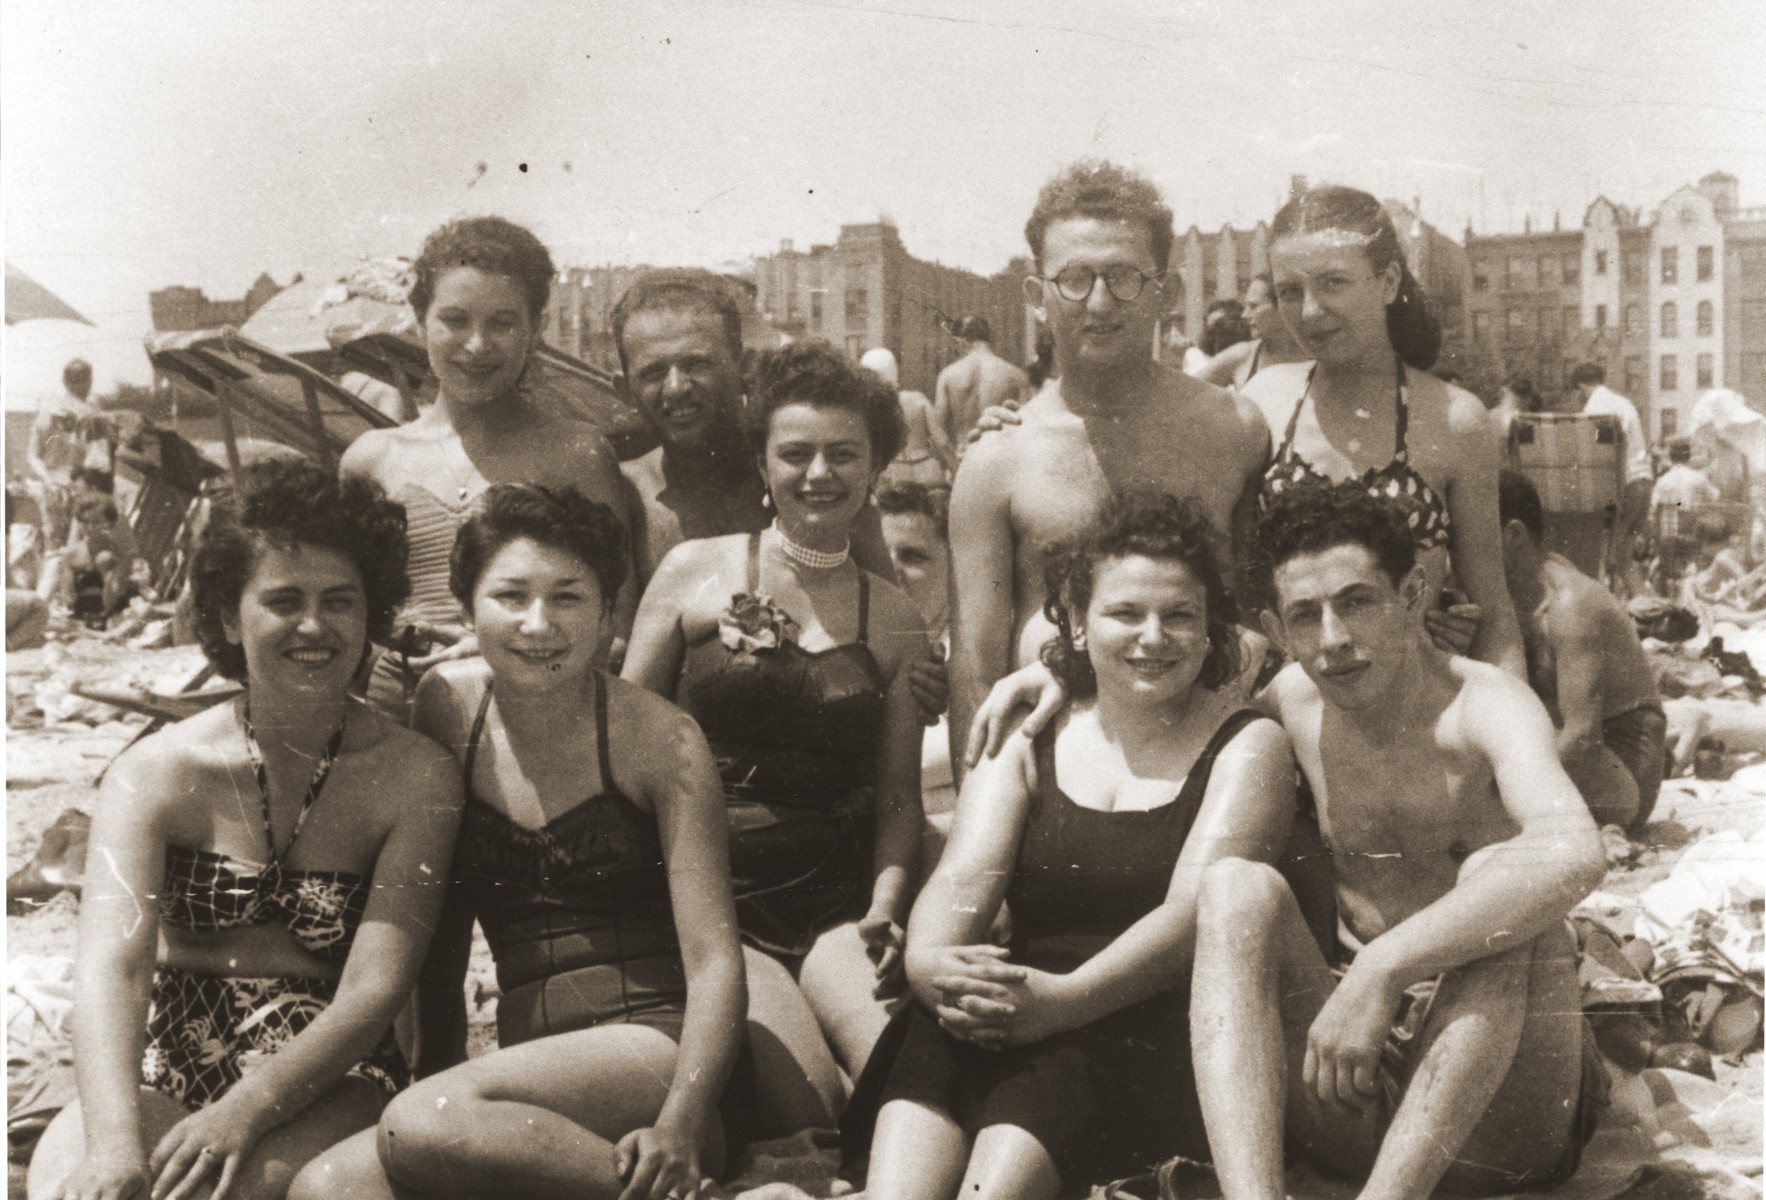 Young Jewish men and women who came to England with the orphans transport relax on the beach.

Pictured in the back row, from left to right are, Lillie Moskovich, Willie Zelovic, Erica Grossman (center wearing a necklace), Hershel and Renate Zelovic.  In the front row, from left to right are, Paulette, Elizabeth Weiss, and Ibi and Willie Rosenberg.